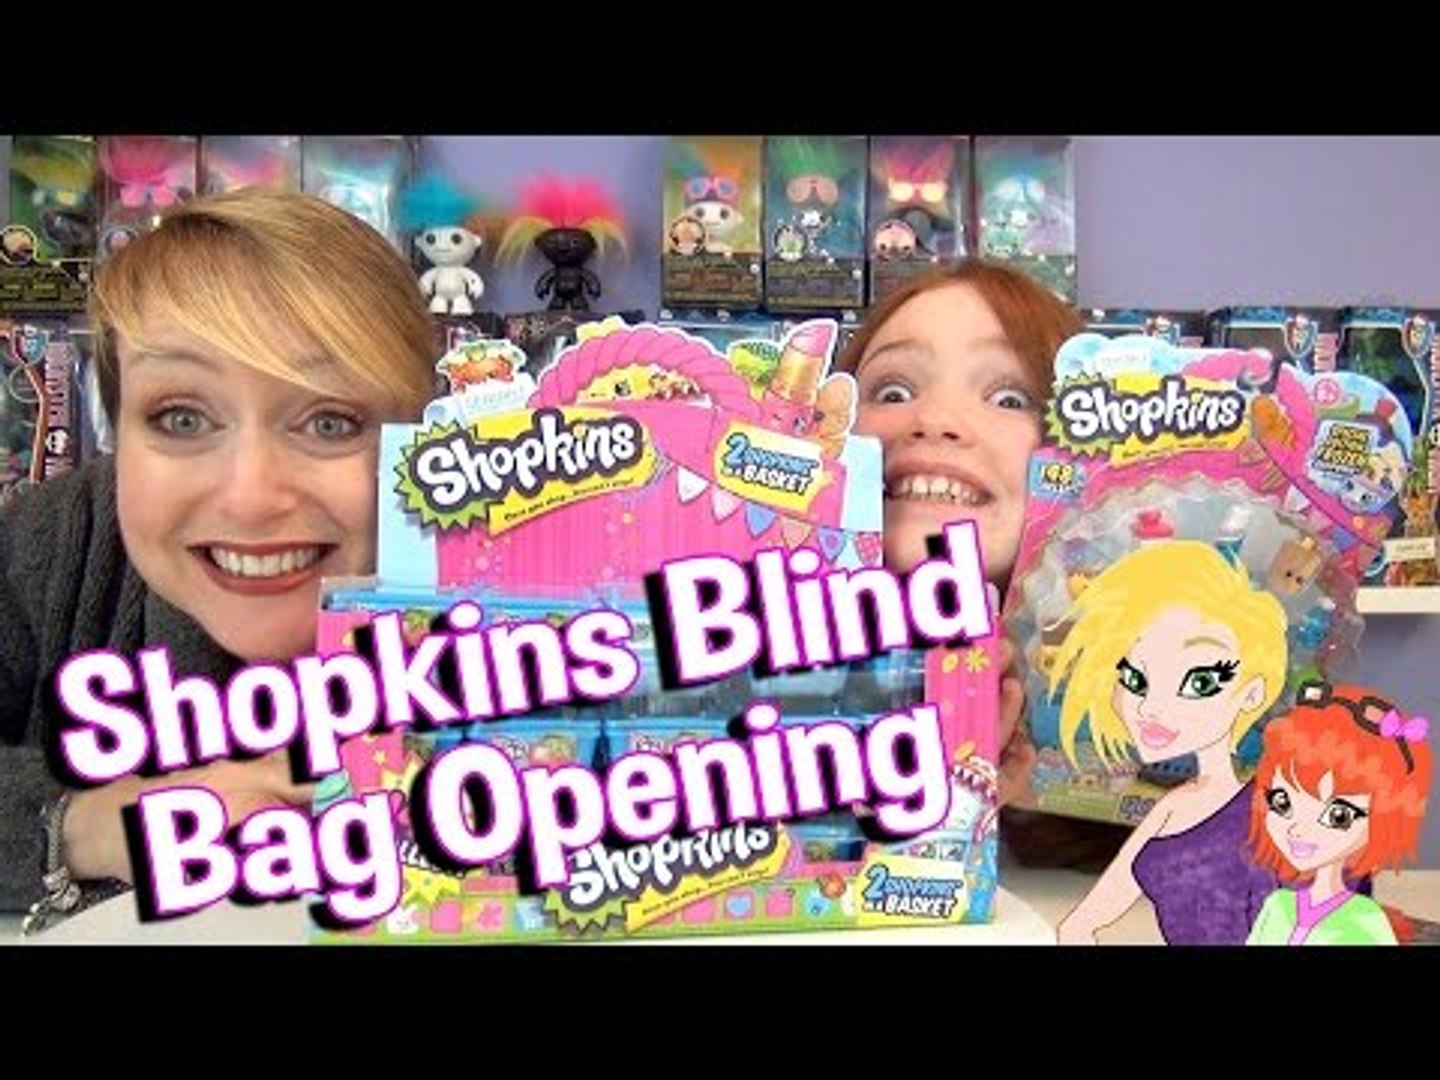 Opening a Whole Case of Shopkins Blind Baskets - Wow!!! - video Dailymotion